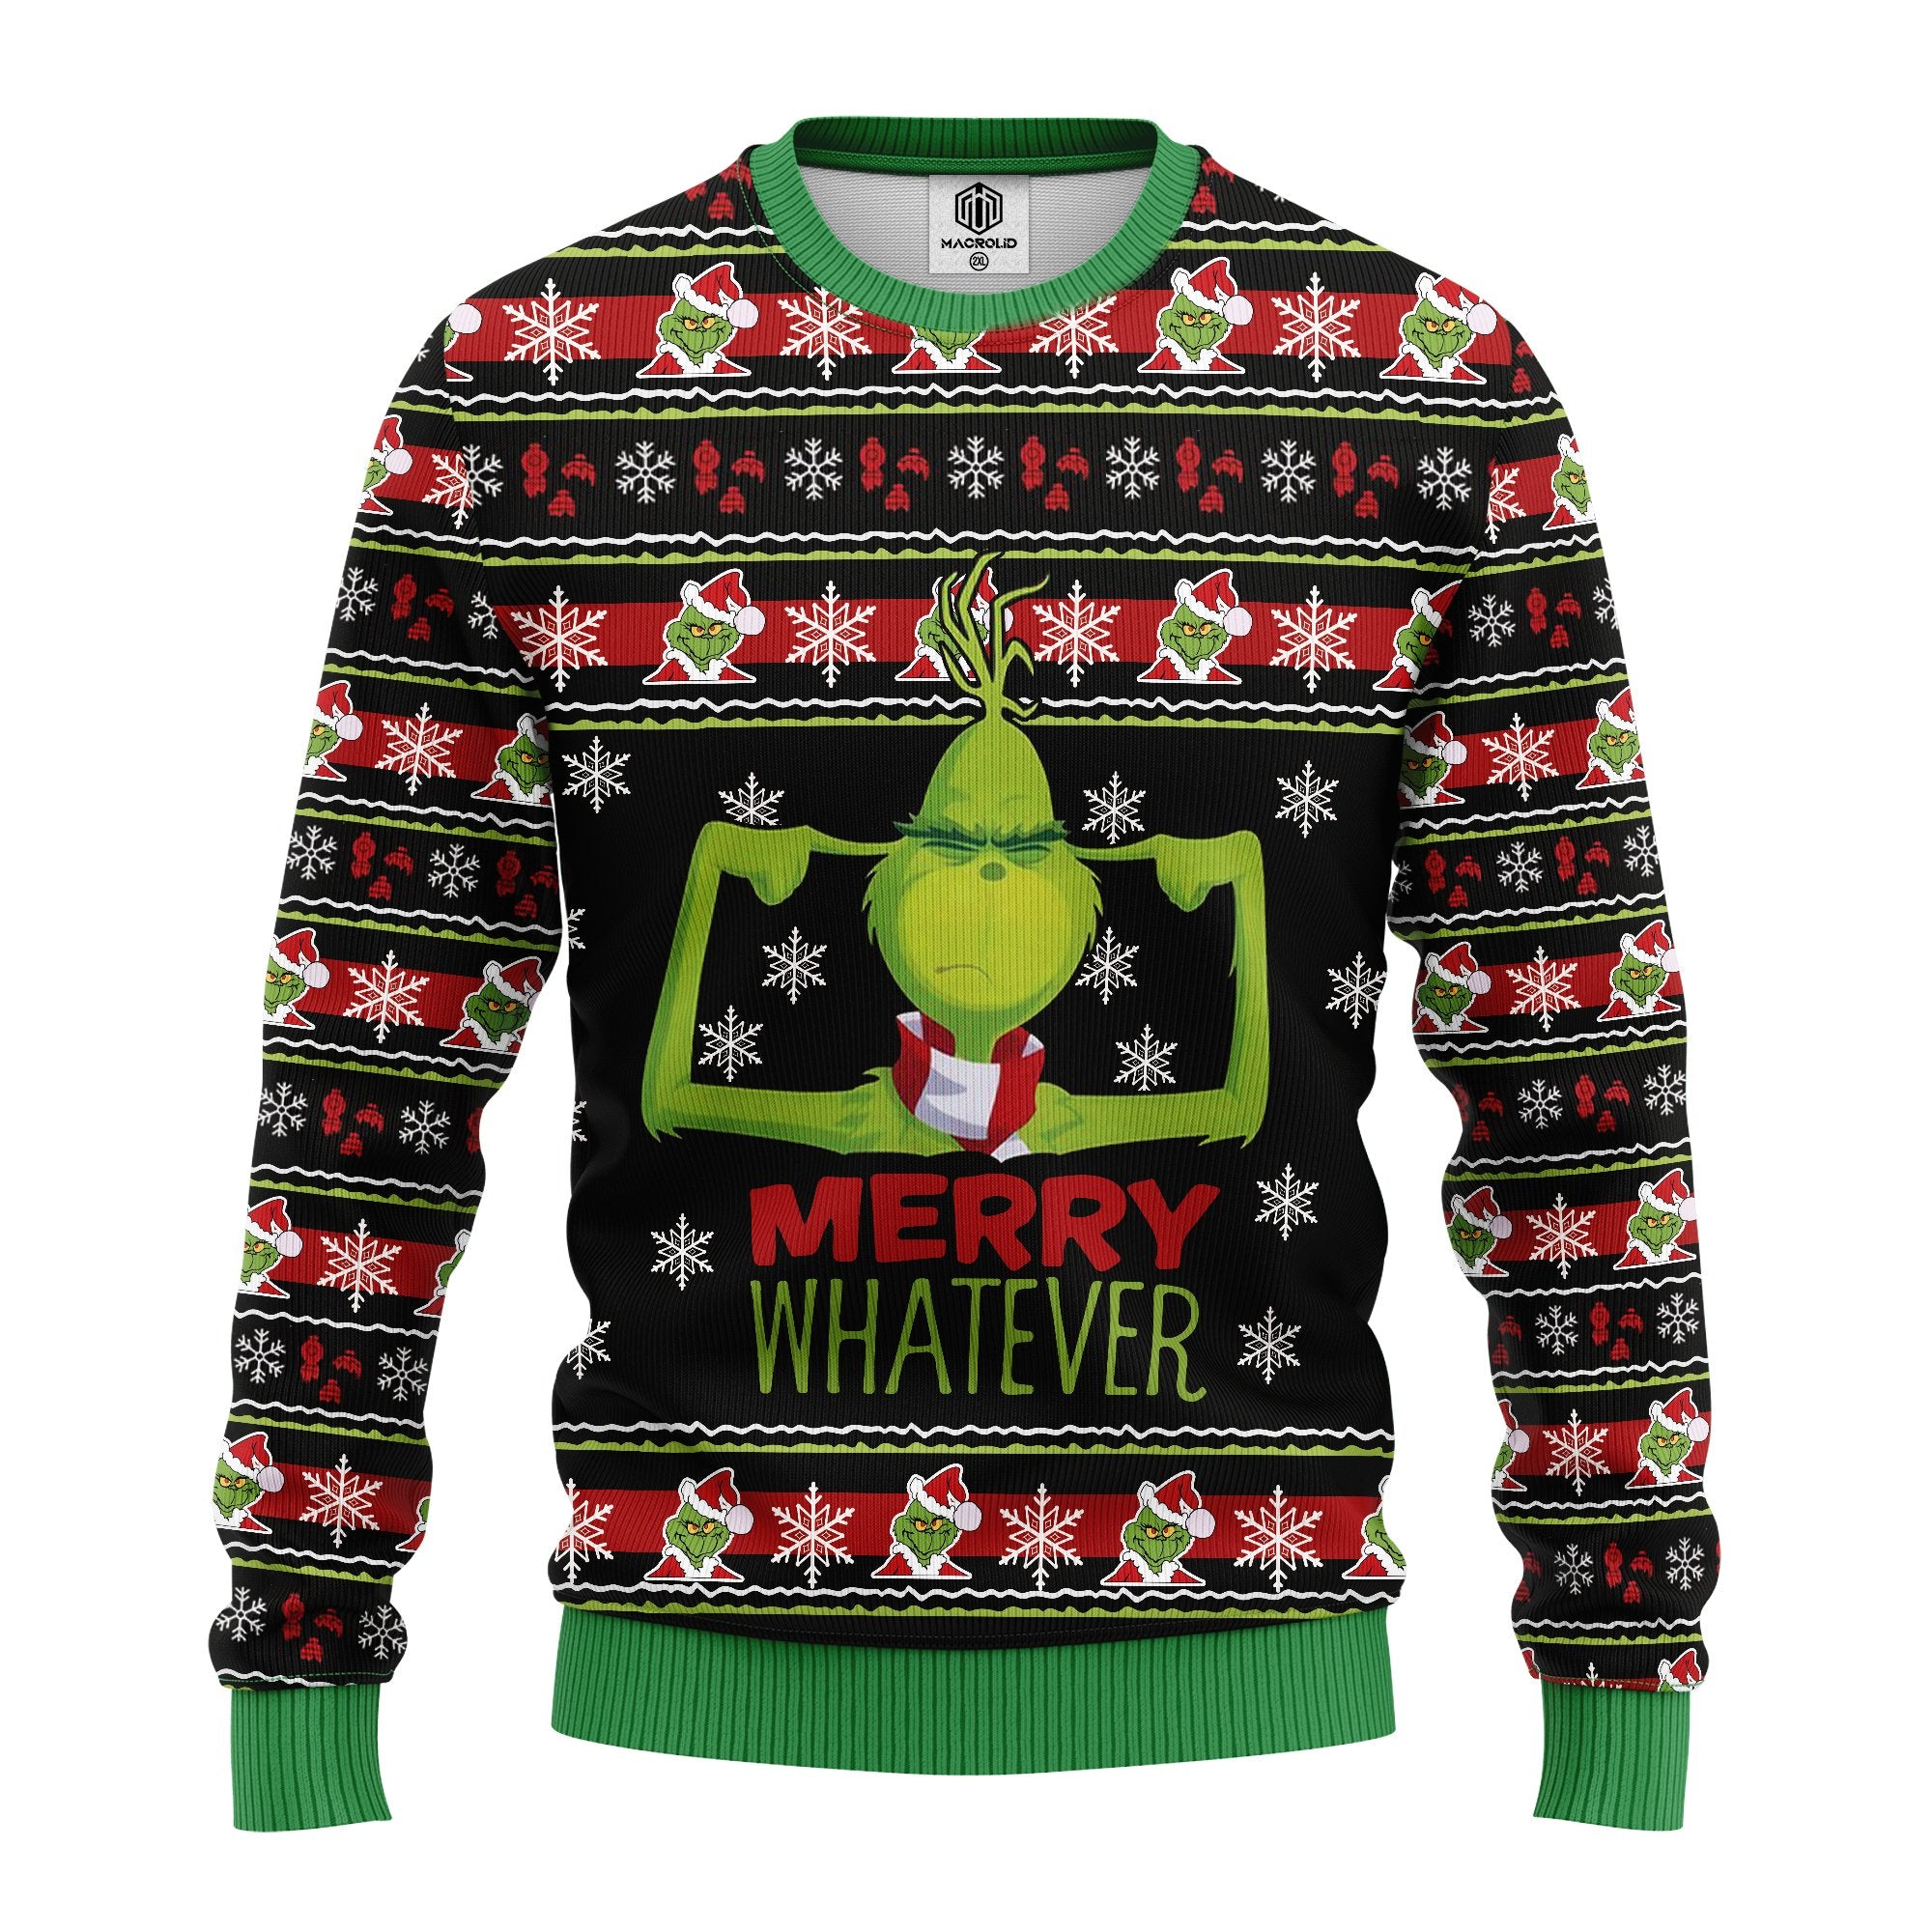 The Grinch Ugly Christmas Sweater Amazing Gift Idea Thanksgiving Gift